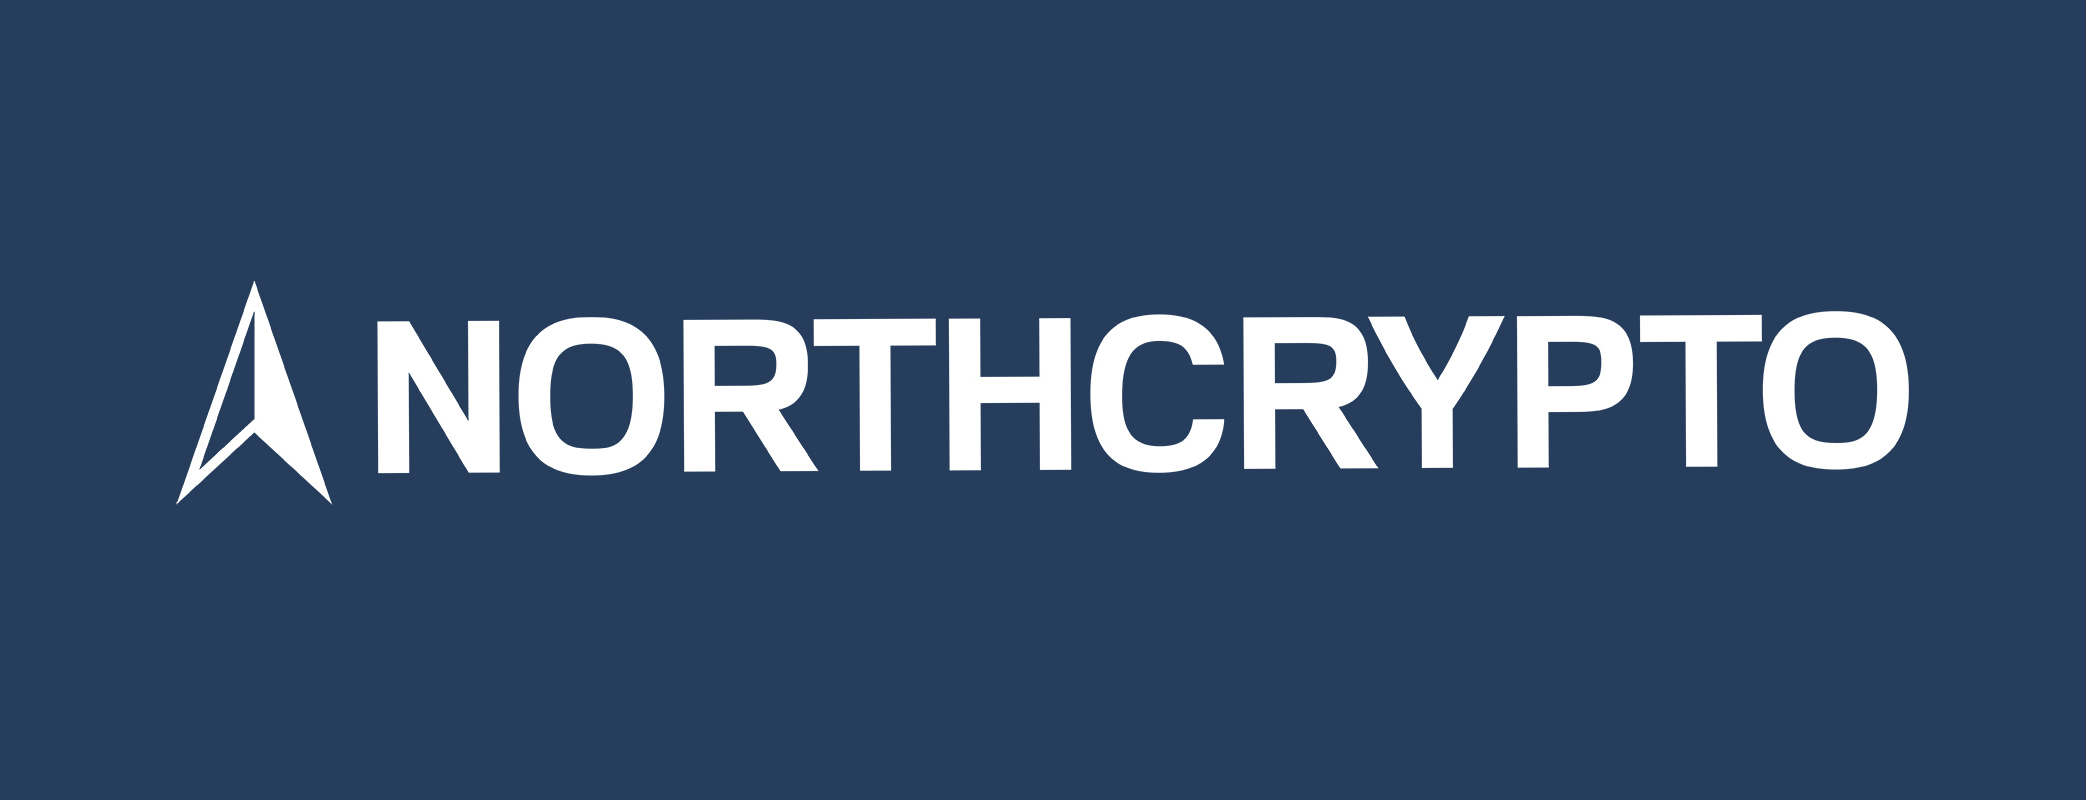 Northcrypto added to the FIN-FSA register as a virtual currency provider